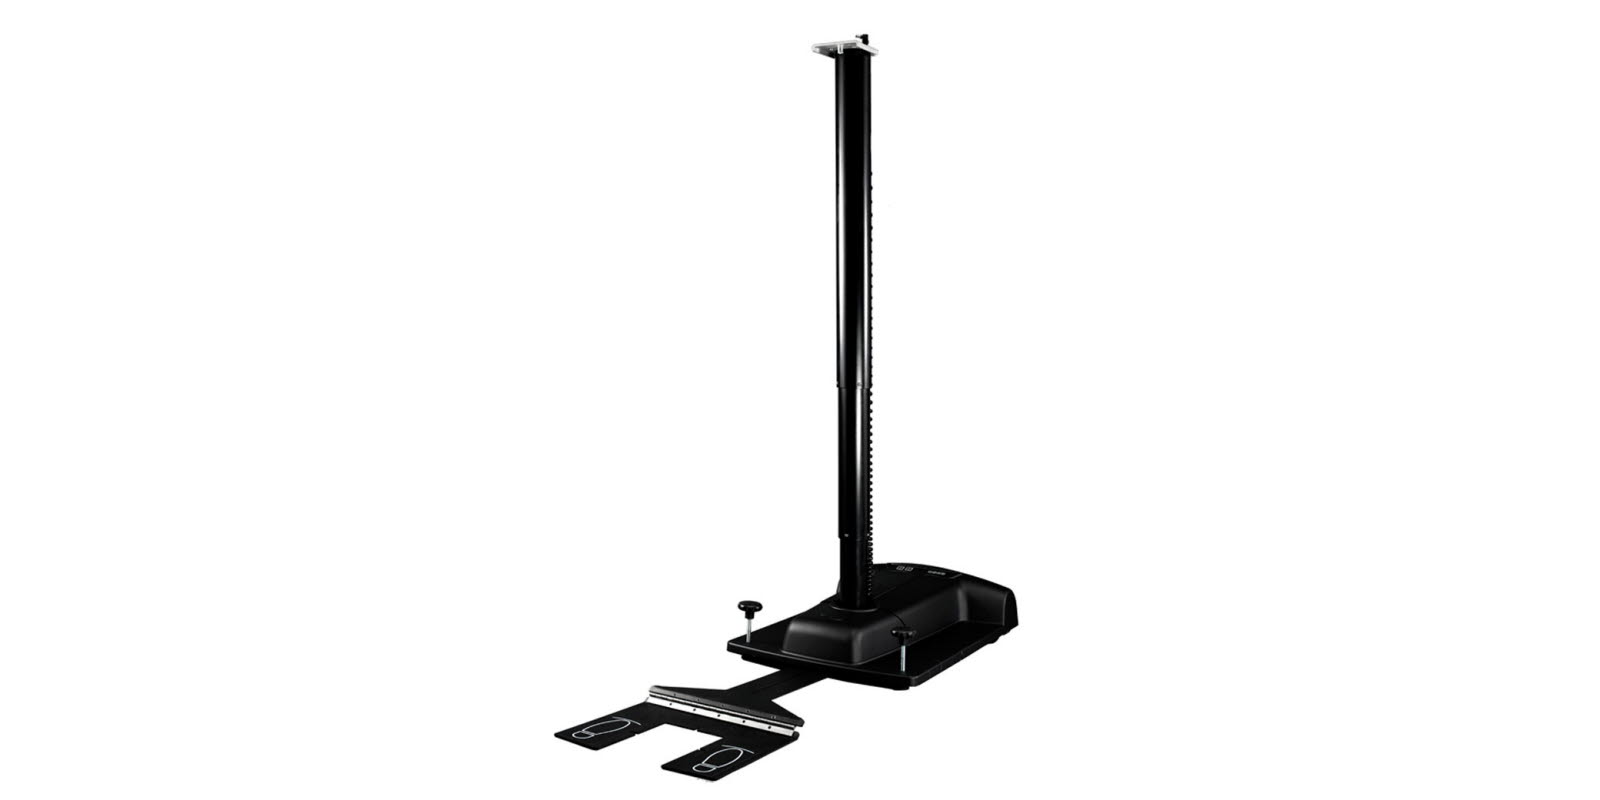 A Tobii Pro floor stand